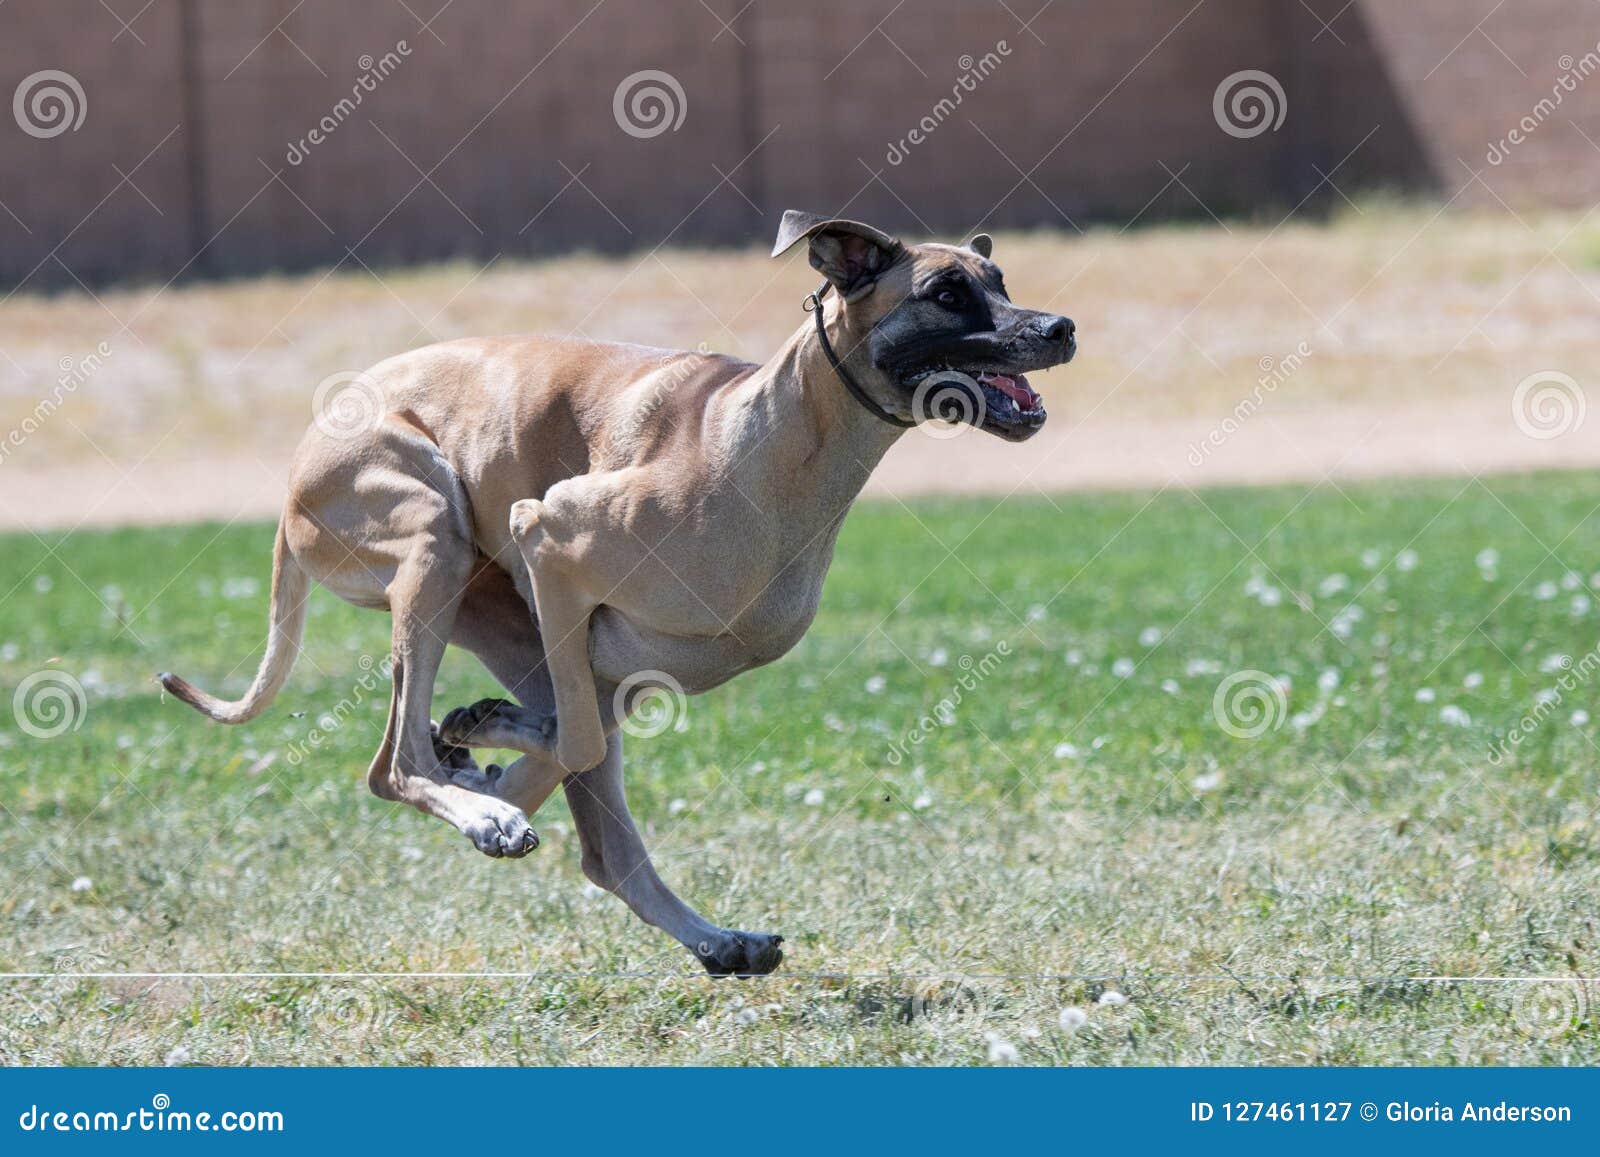 Great Dane Running in Lure Course Stock Image - Image of coursing